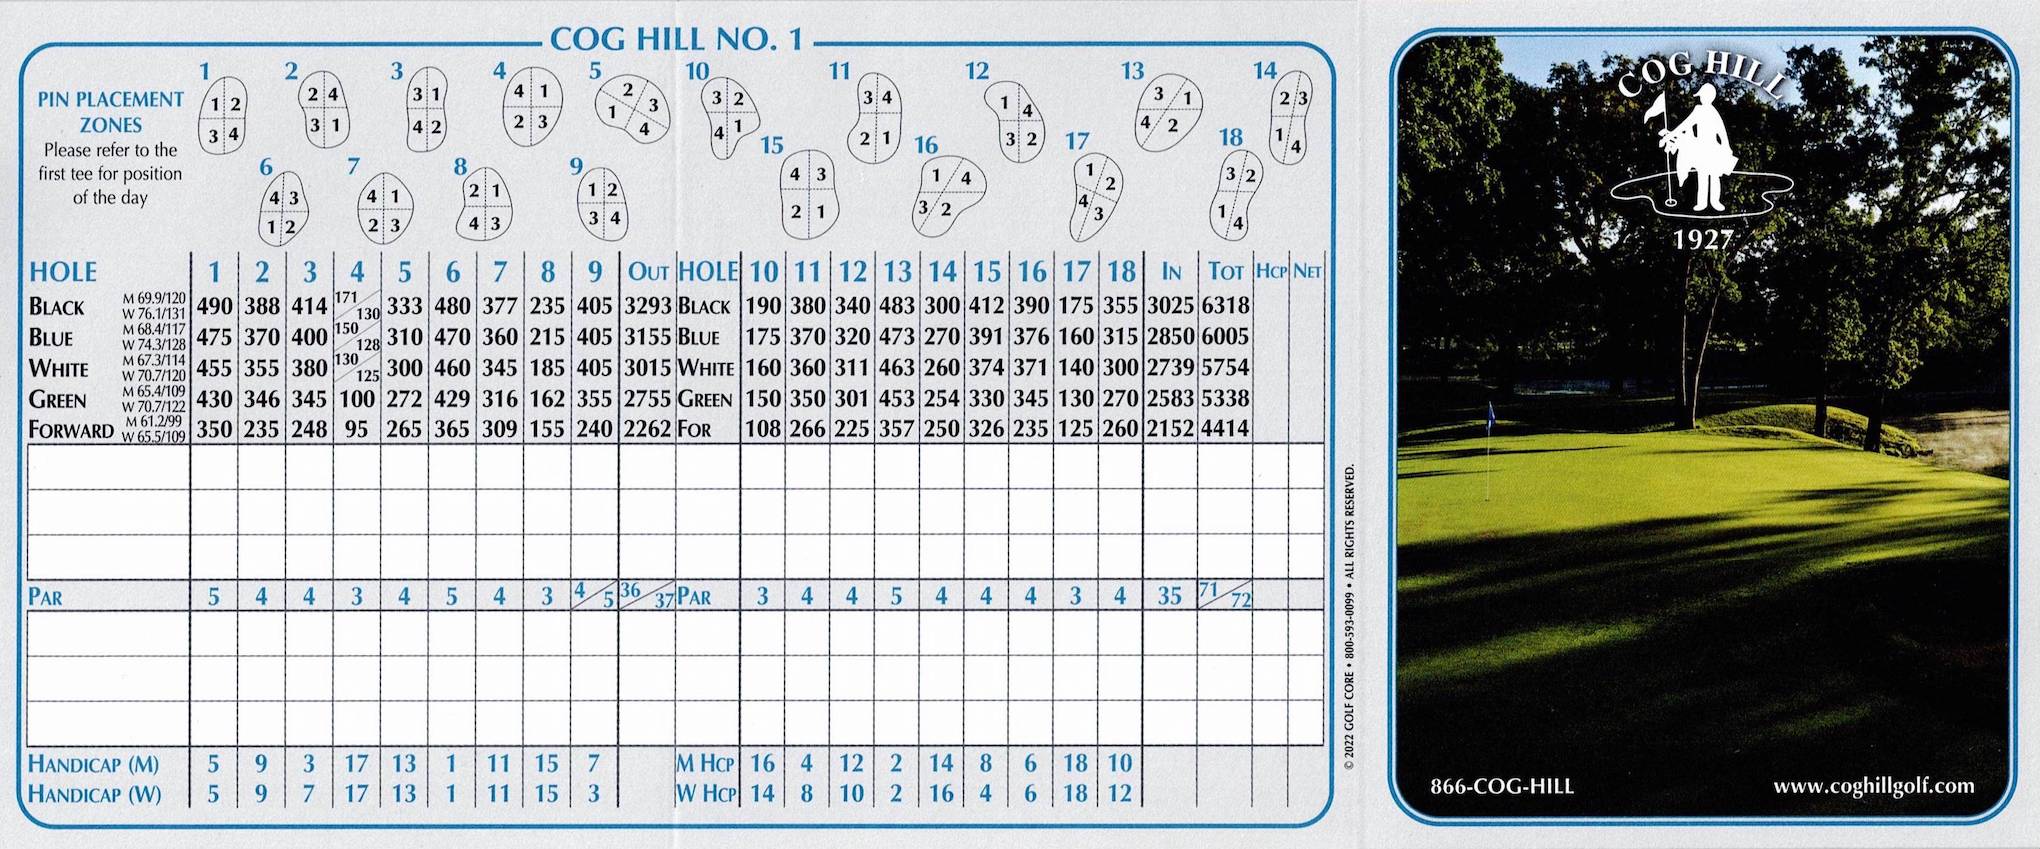 Scan of the scorecard from Cog Hill Course #1 in Palos Park, Illinois. Note that hole 4 has two completely separate greens and tee box areas, and can be played at a wide variety of distances as a result. Also, hole 9 can be played as a par 4 or 5.